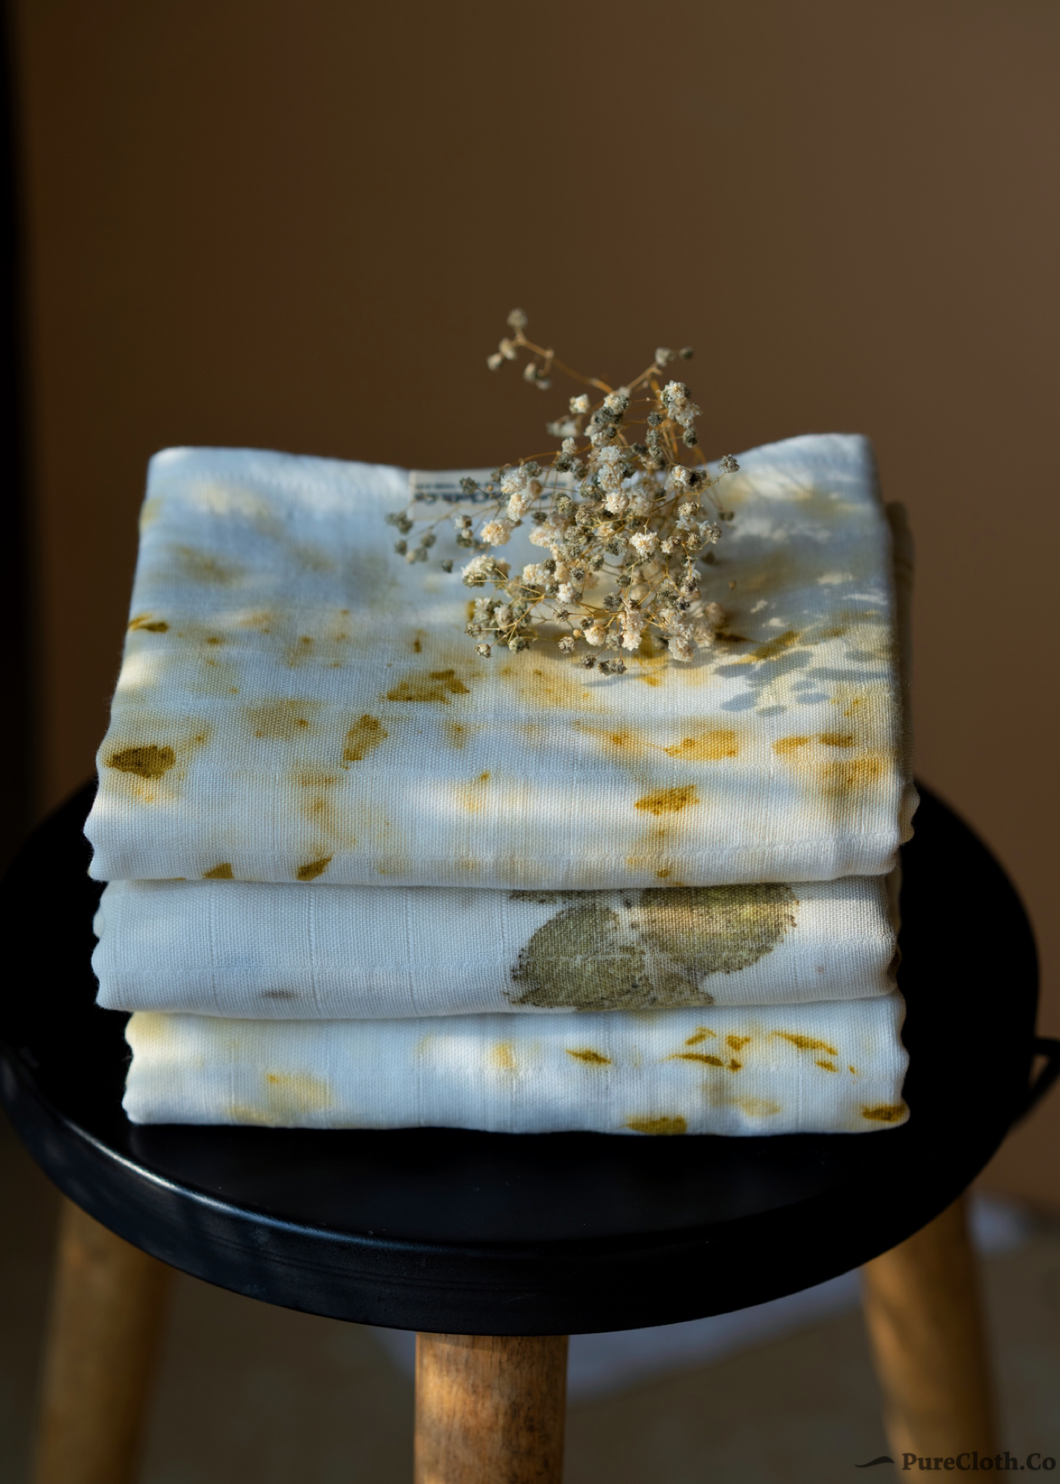 A bundle of muslin baby swaddles with marigold ecoprinted on them kept upon a wooden chair with some flowers upon it.